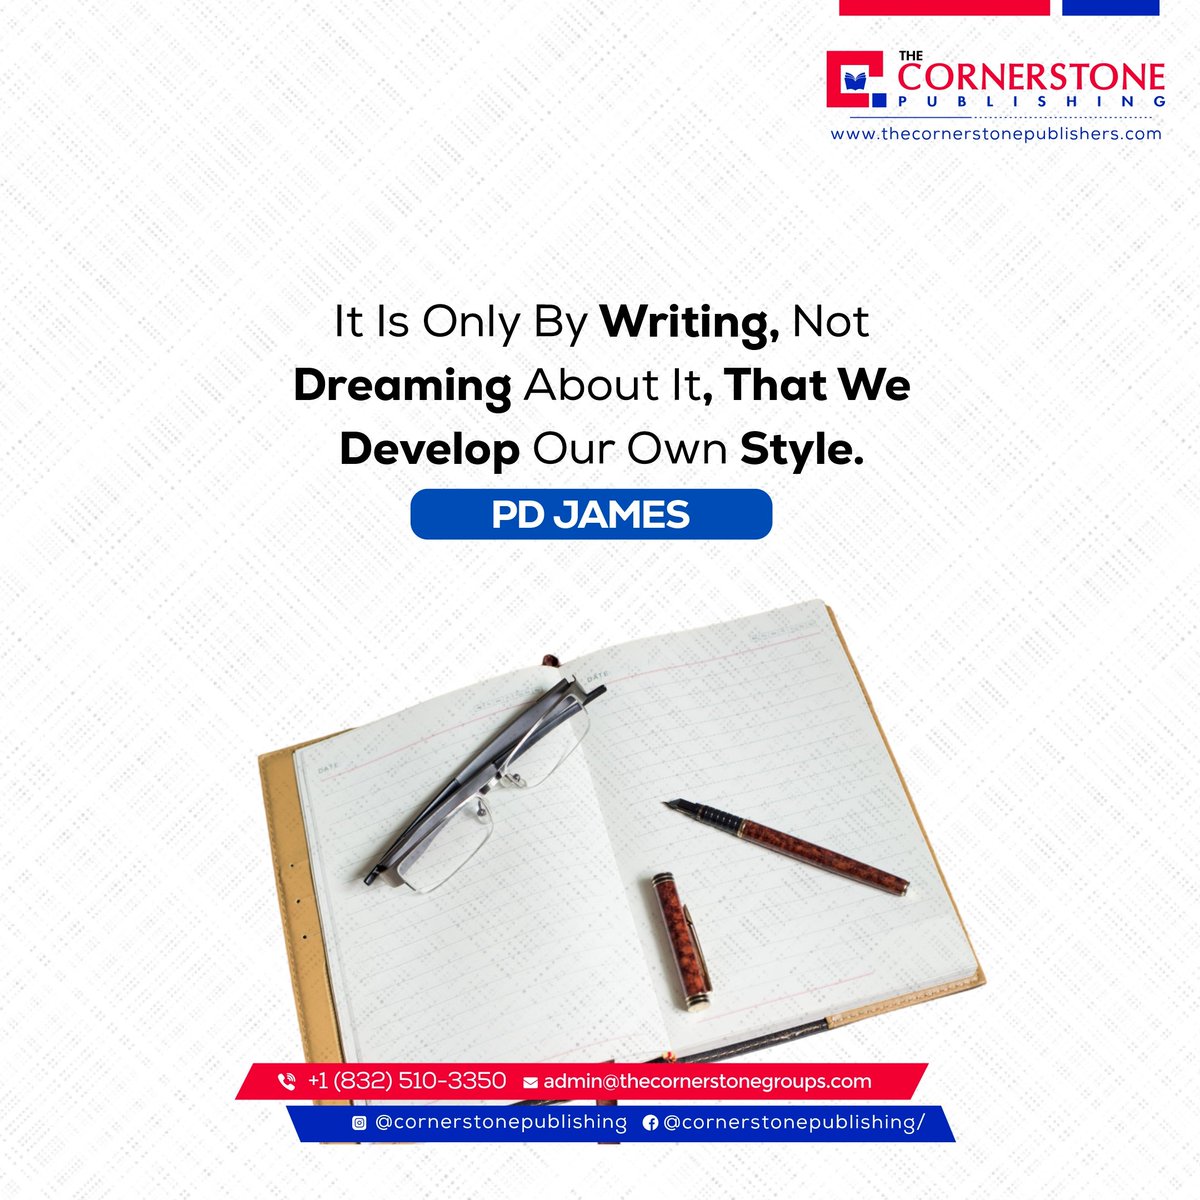 We develop our own style by writing and not dreaming.

Enjoy your week!!!

#Cornerstonepublishing #gbengashowunmi #AuthorShowcase #bestsellingbooks #writers #selfpublishing #bookcovers #booksfactory #GetPublished #greatreads #booklaunch